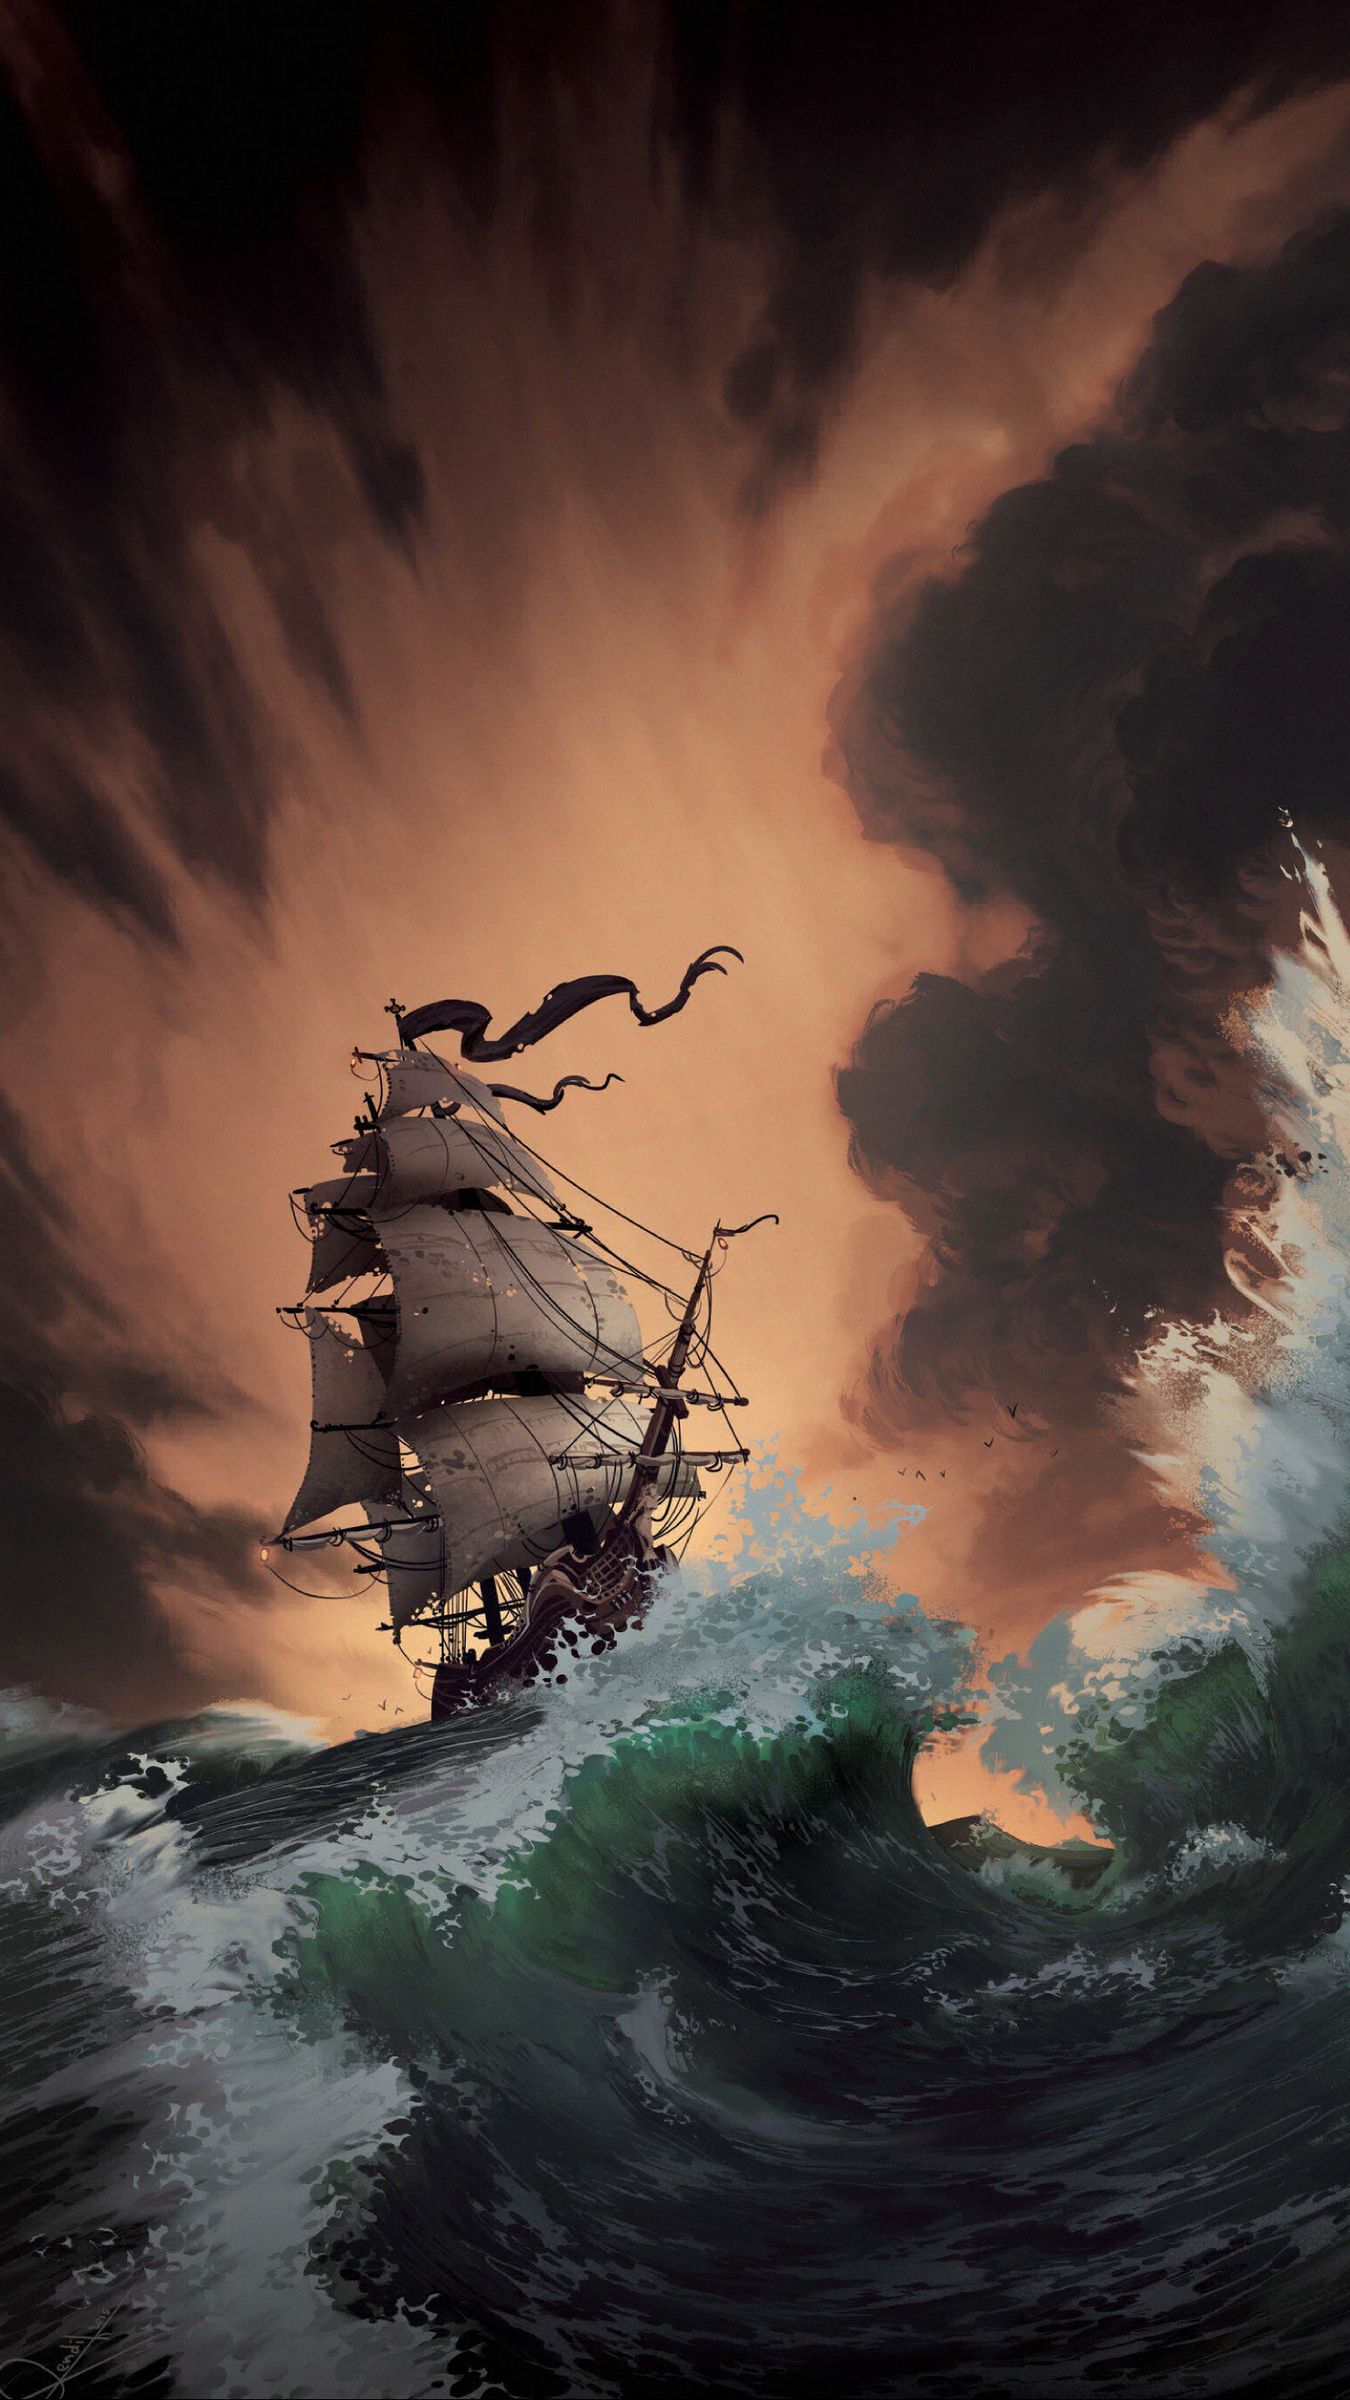 Ship On The Ocean Artistic Wallpapers